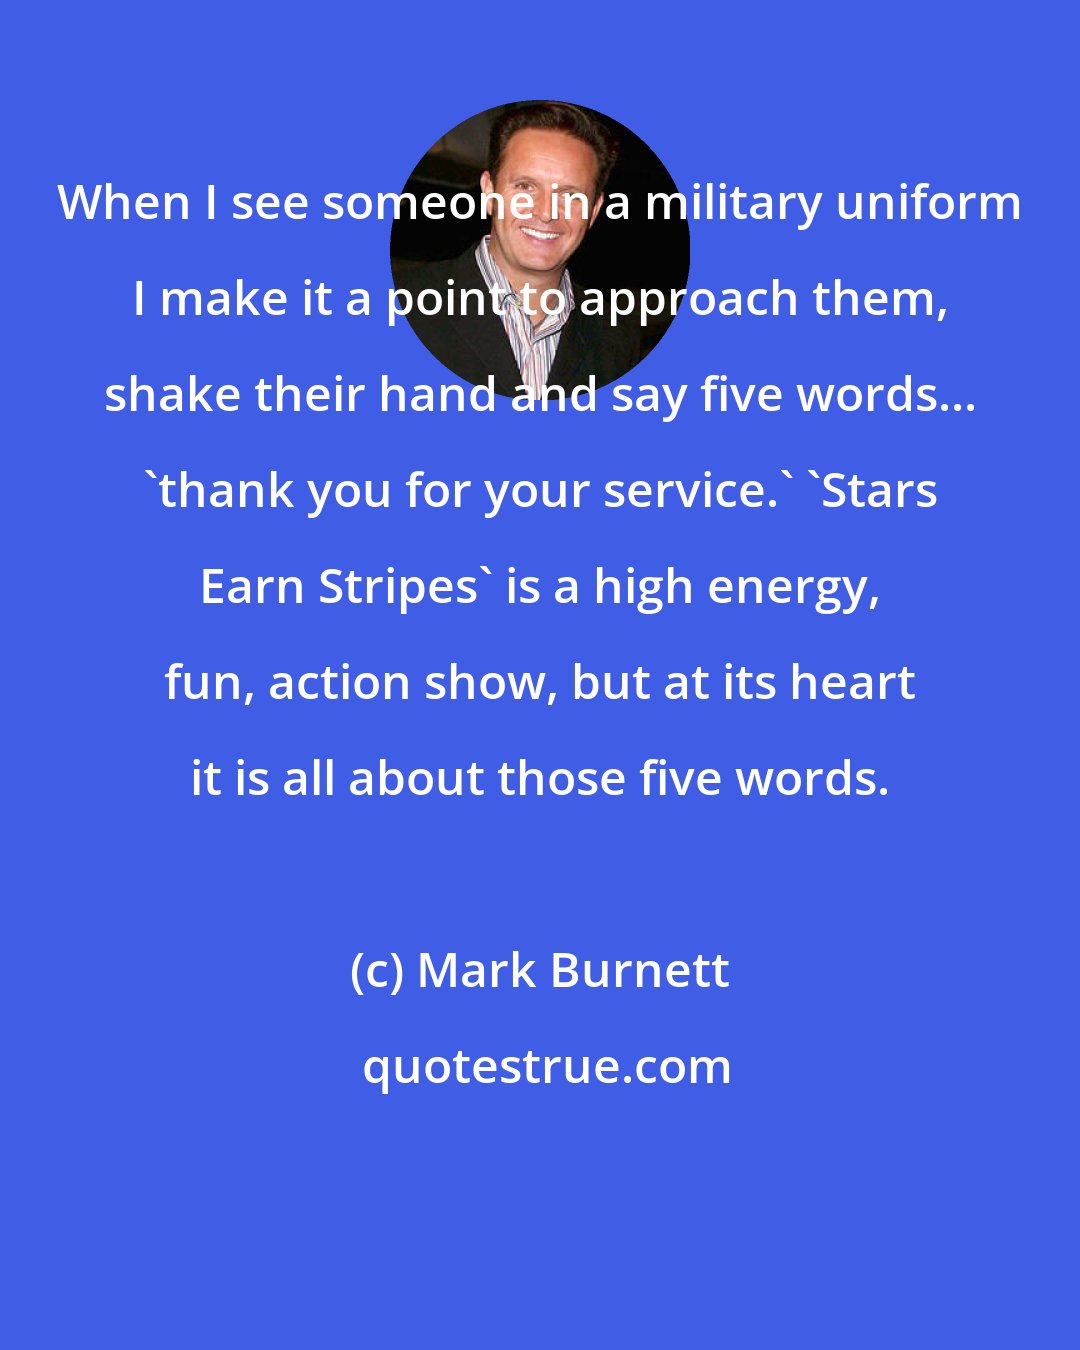 Mark Burnett: When I see someone in a military uniform I make it a point to approach them, shake their hand and say five words... 'thank you for your service.' 'Stars Earn Stripes' is a high energy, fun, action show, but at its heart it is all about those five words.